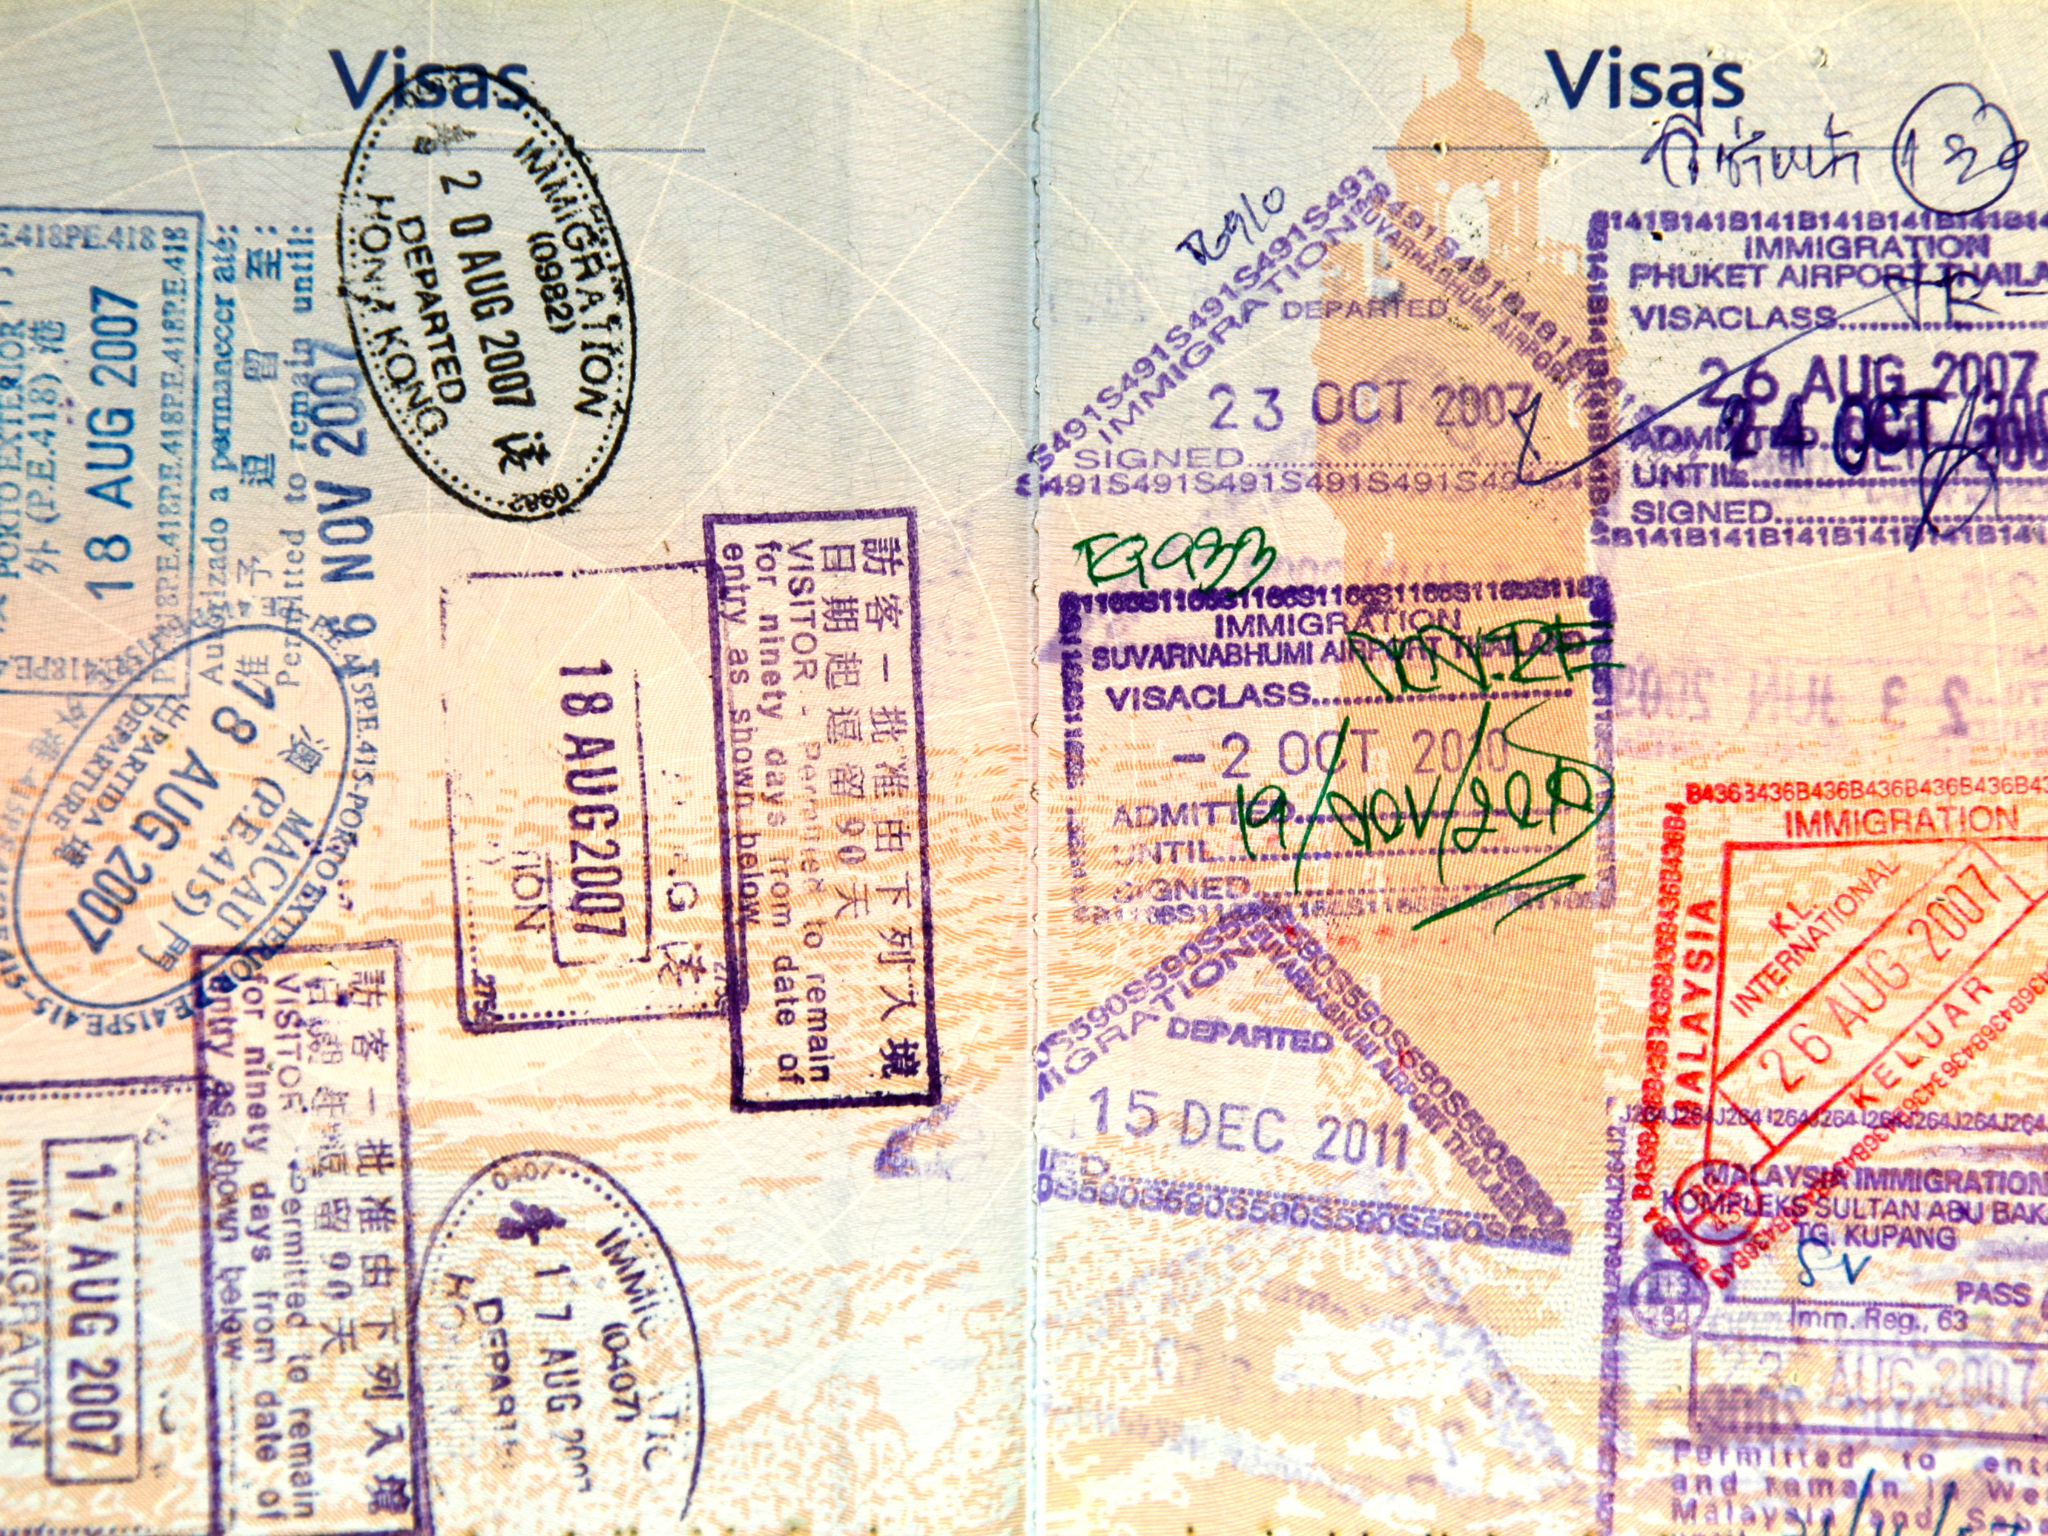 Visa Stamps in a passport﻿